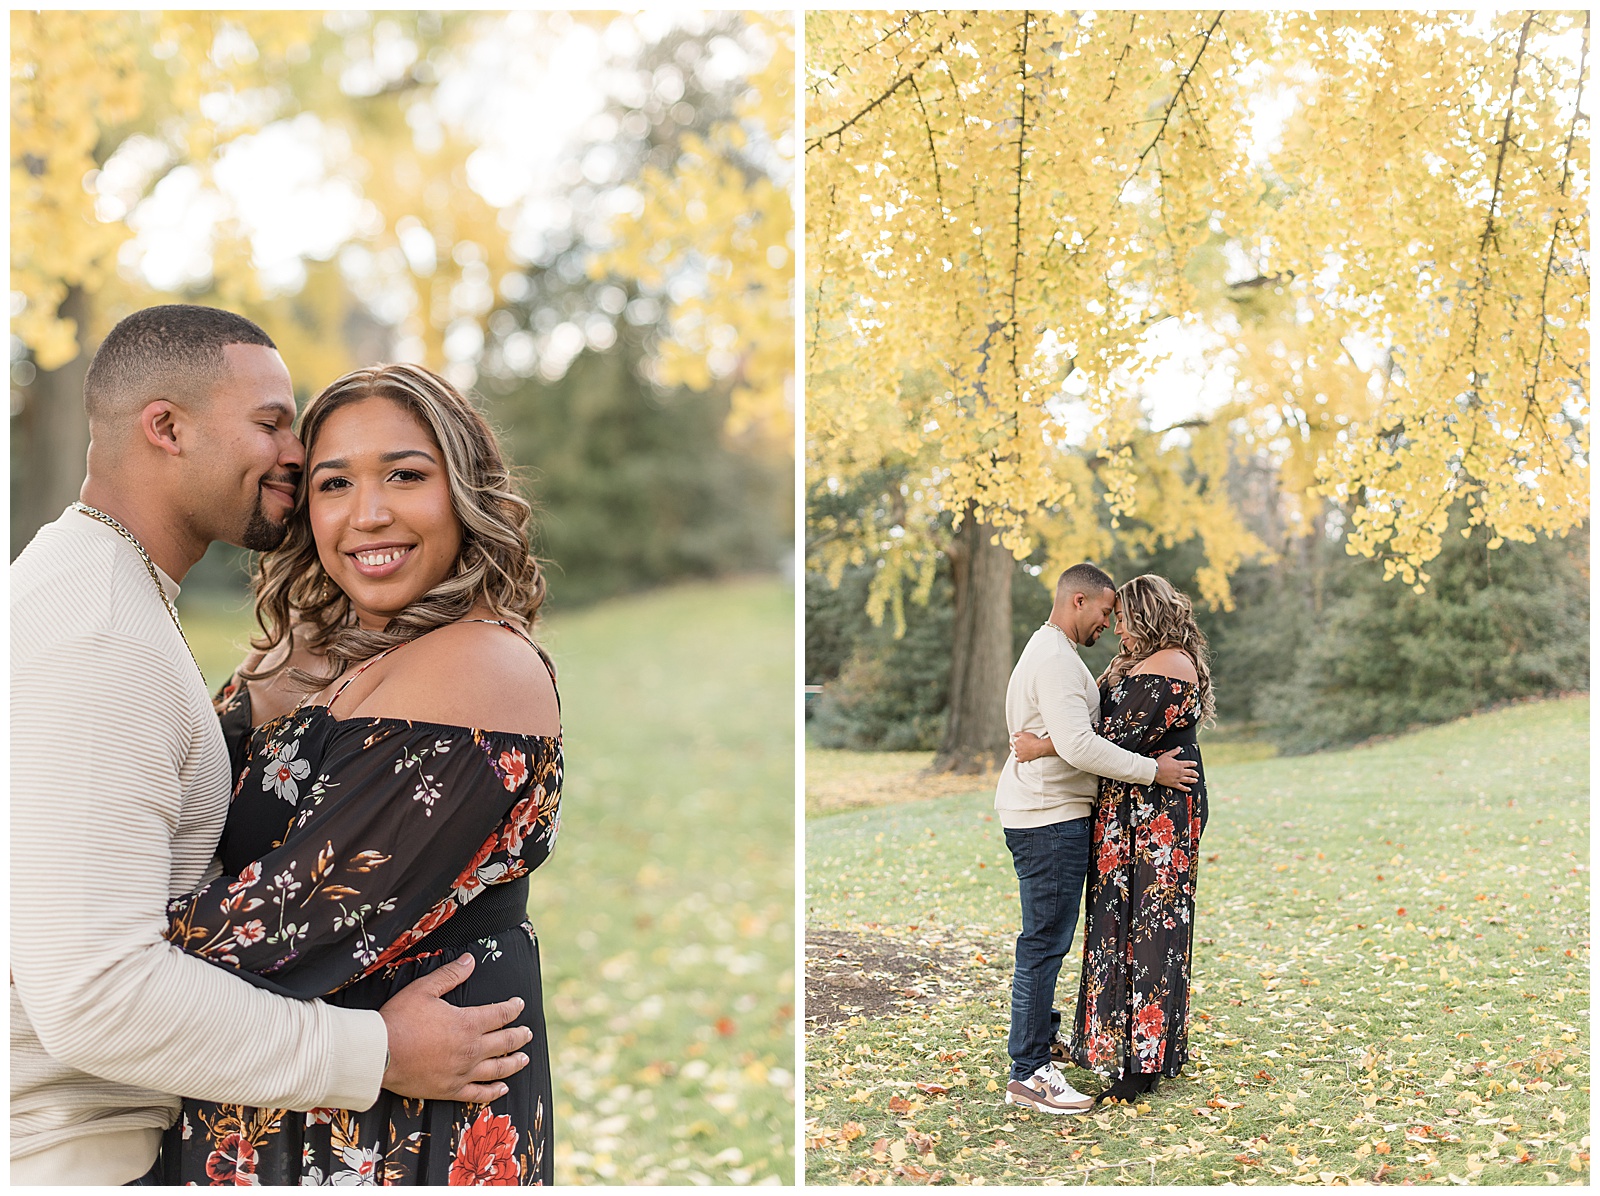 engaged couple standing close with arms around each other as woman smiles at camera under beautiful fall tree with yellow leaves